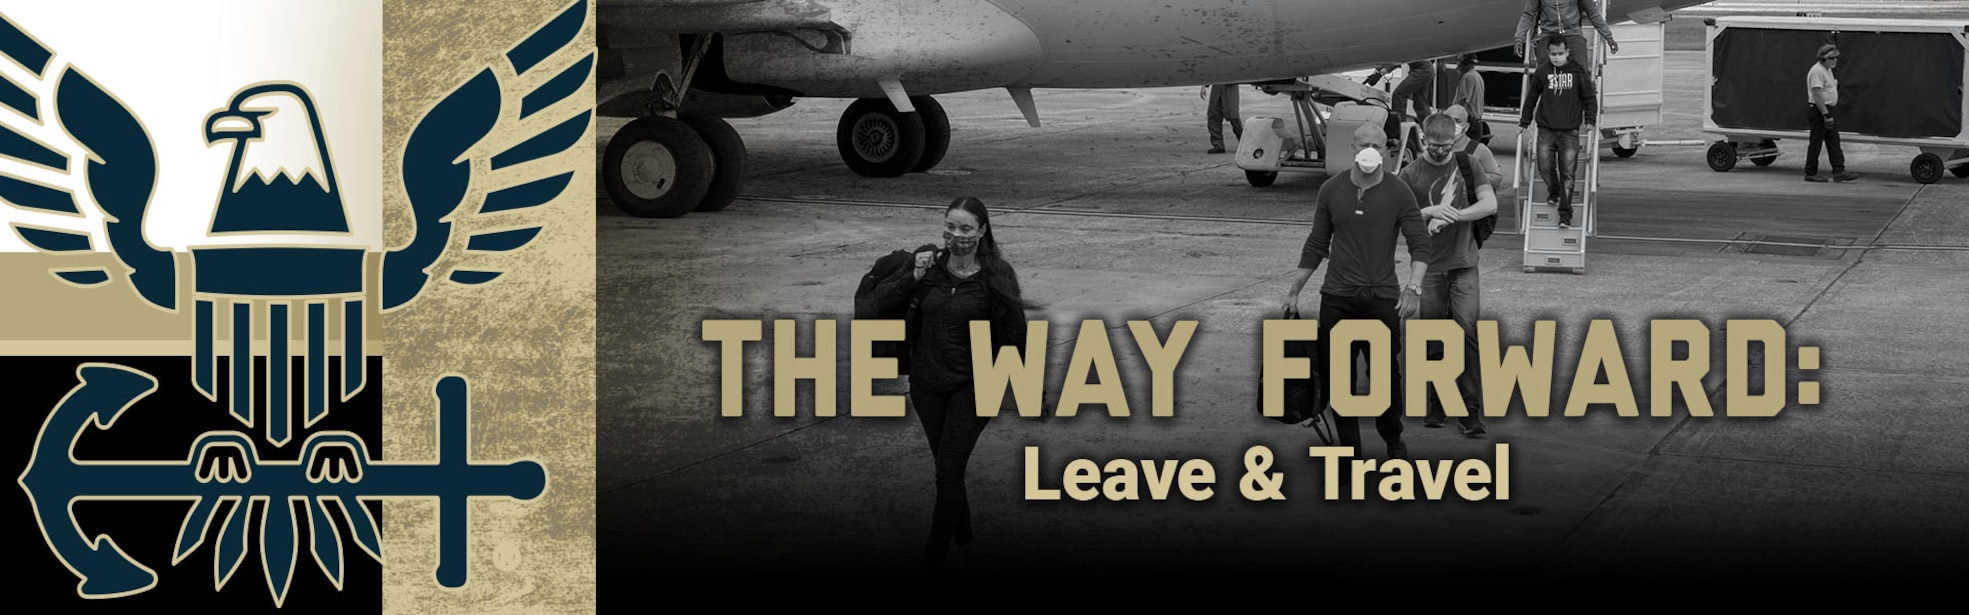 The Way Forward: Leave & Travel banner featuring black white sailors walking out of airplane with dark navy blue and gold accent